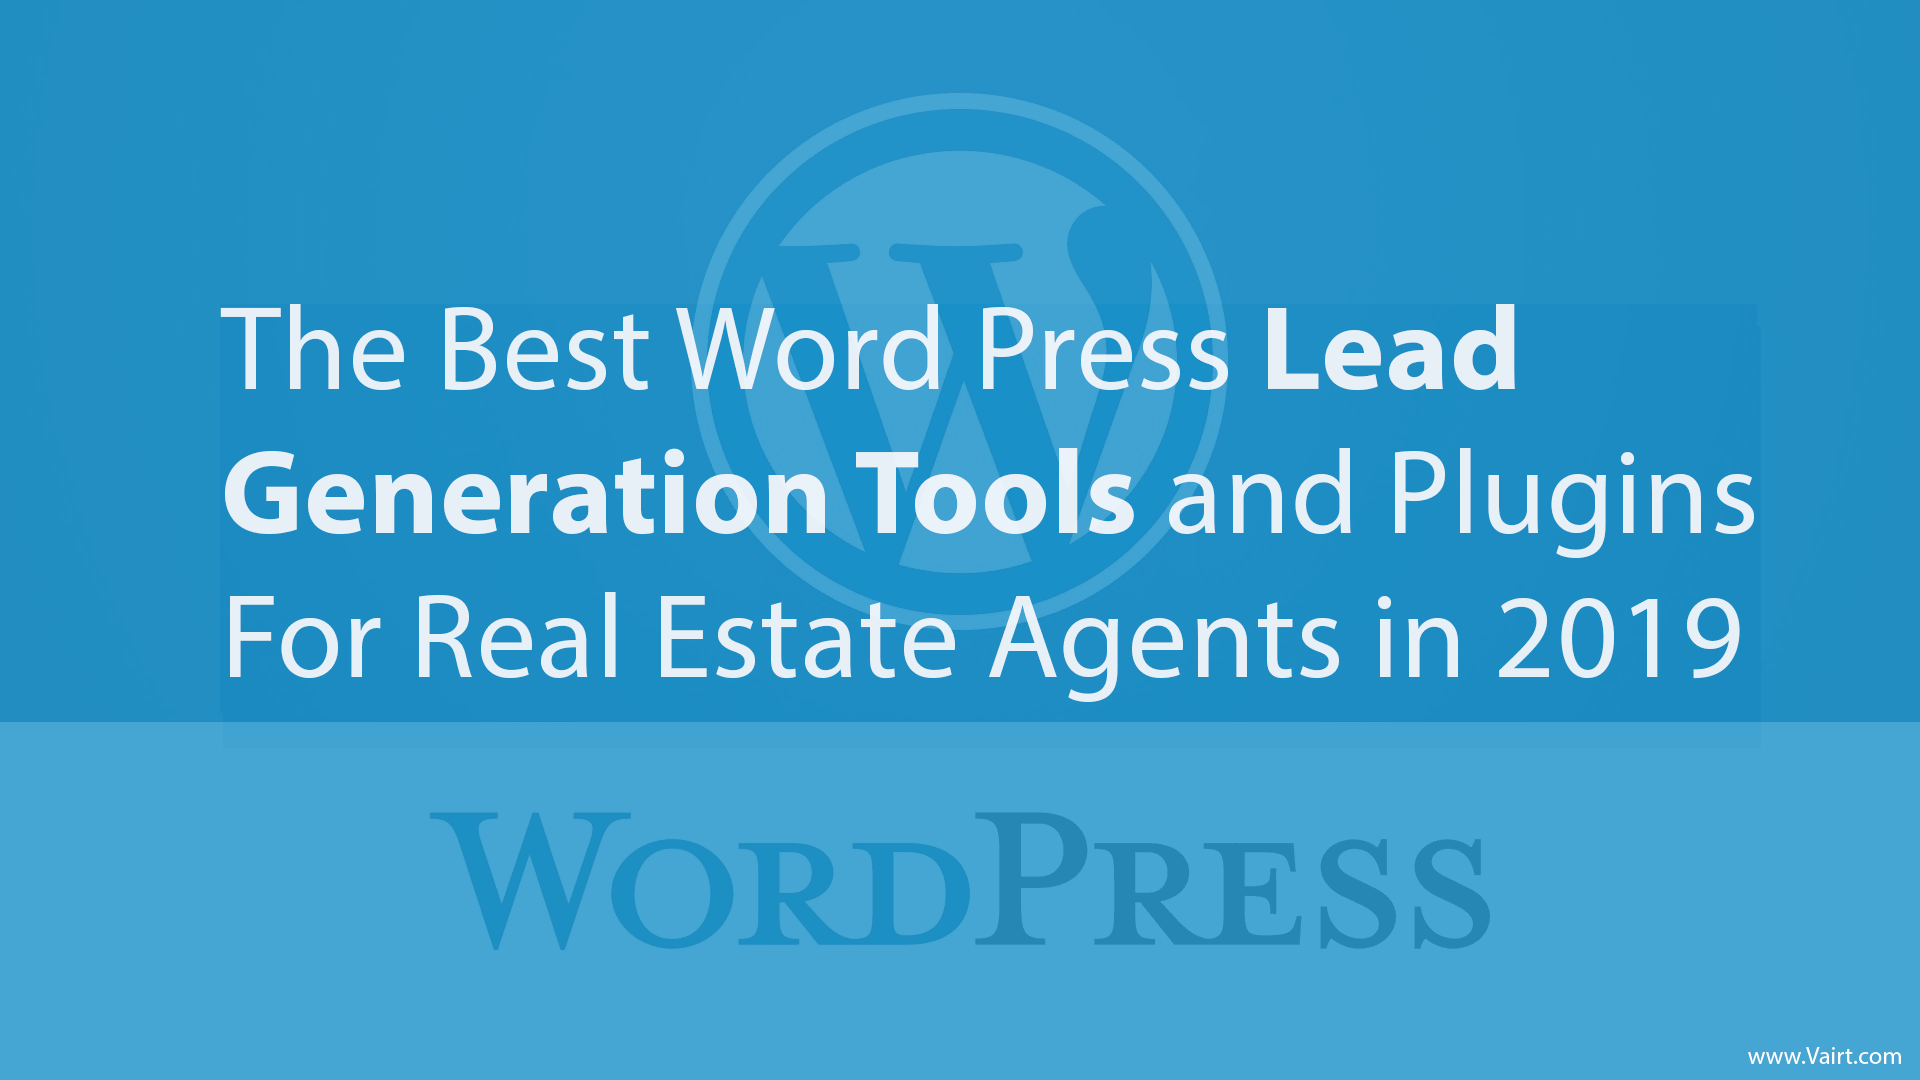 Best WordPress Tools and Plugins for Real Estate Agents